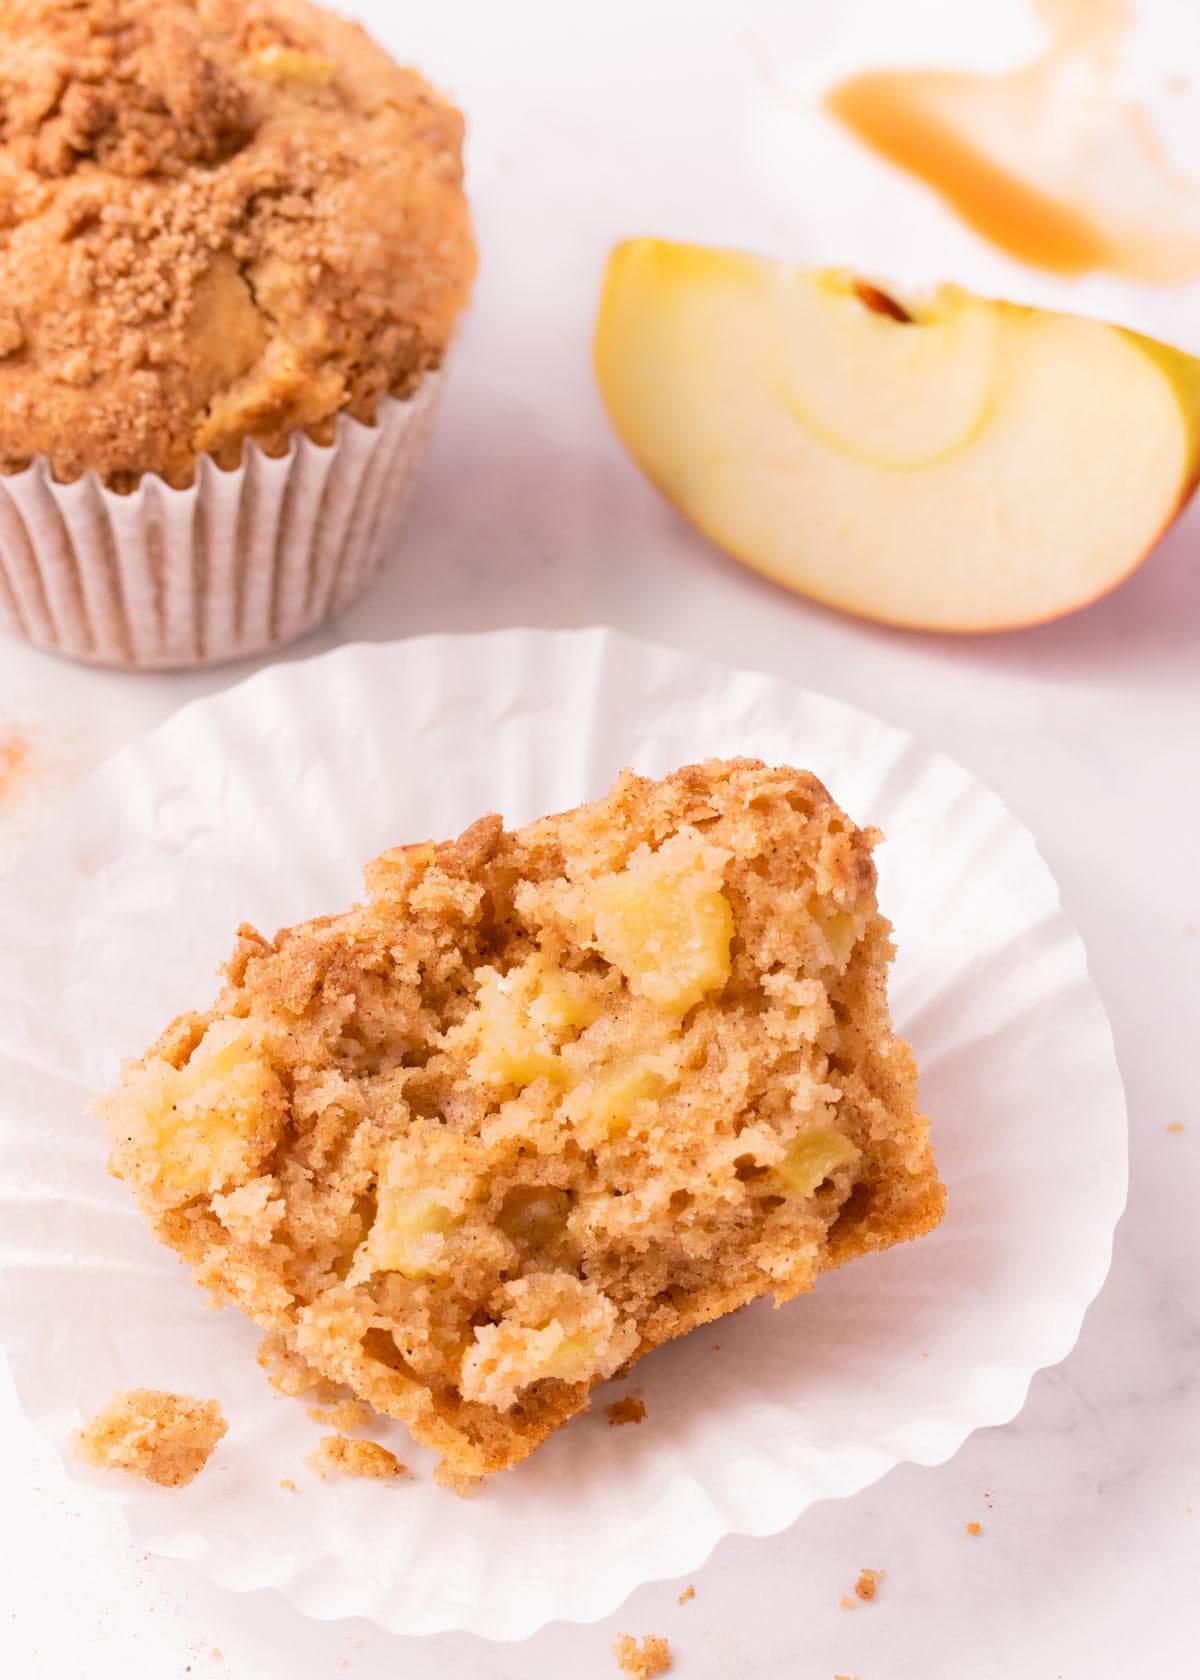 Half of a gf apple muffin, showing the texture of the muffin and the chunks of apple inside.